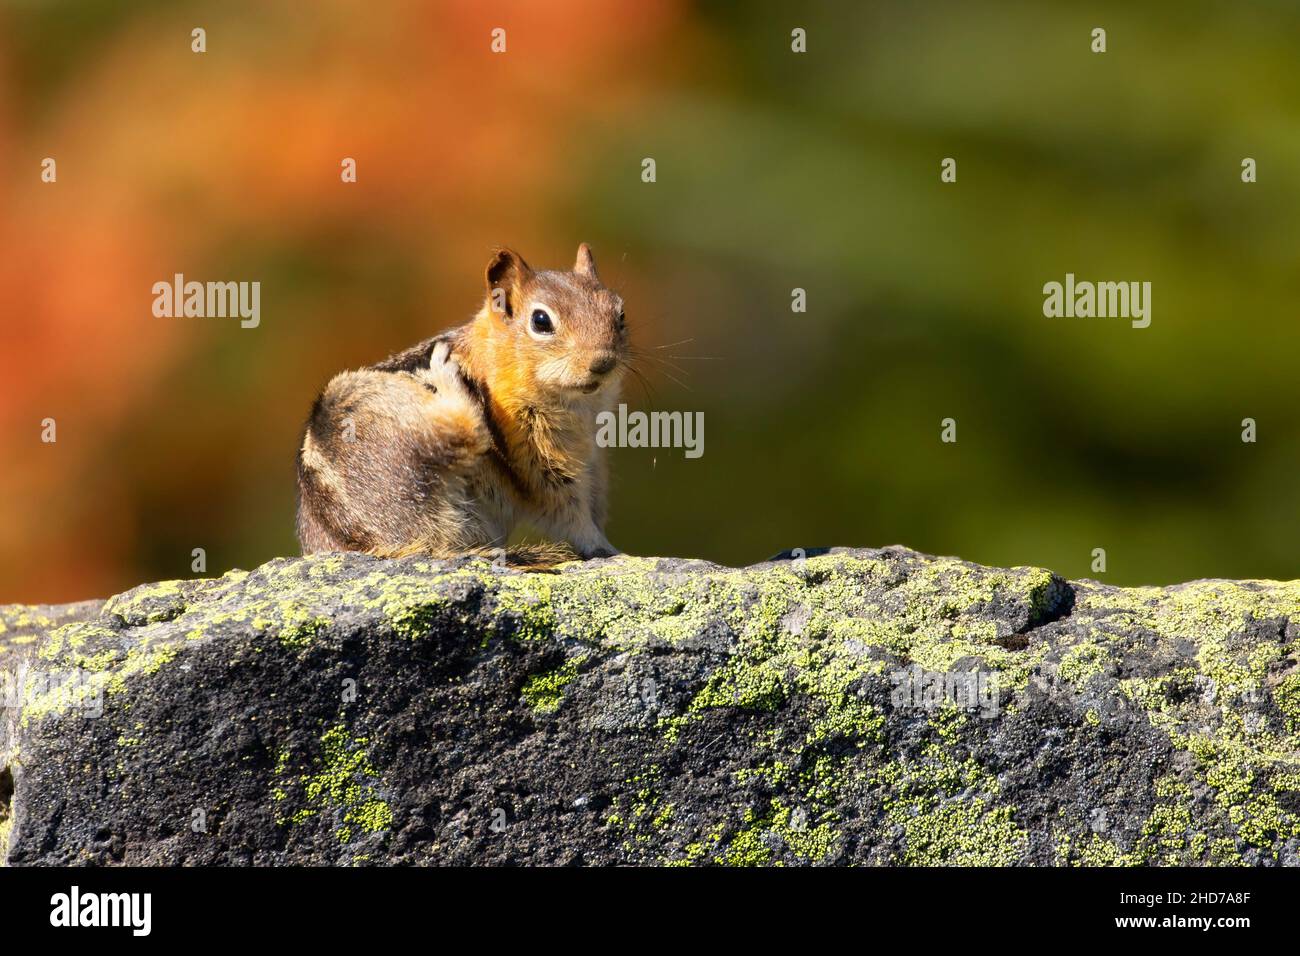 Golden-mantled ground squirrel (Spermophilus lateralis) at Charlton Lake, Deschutes National Forest, Oregon. Stock Photo